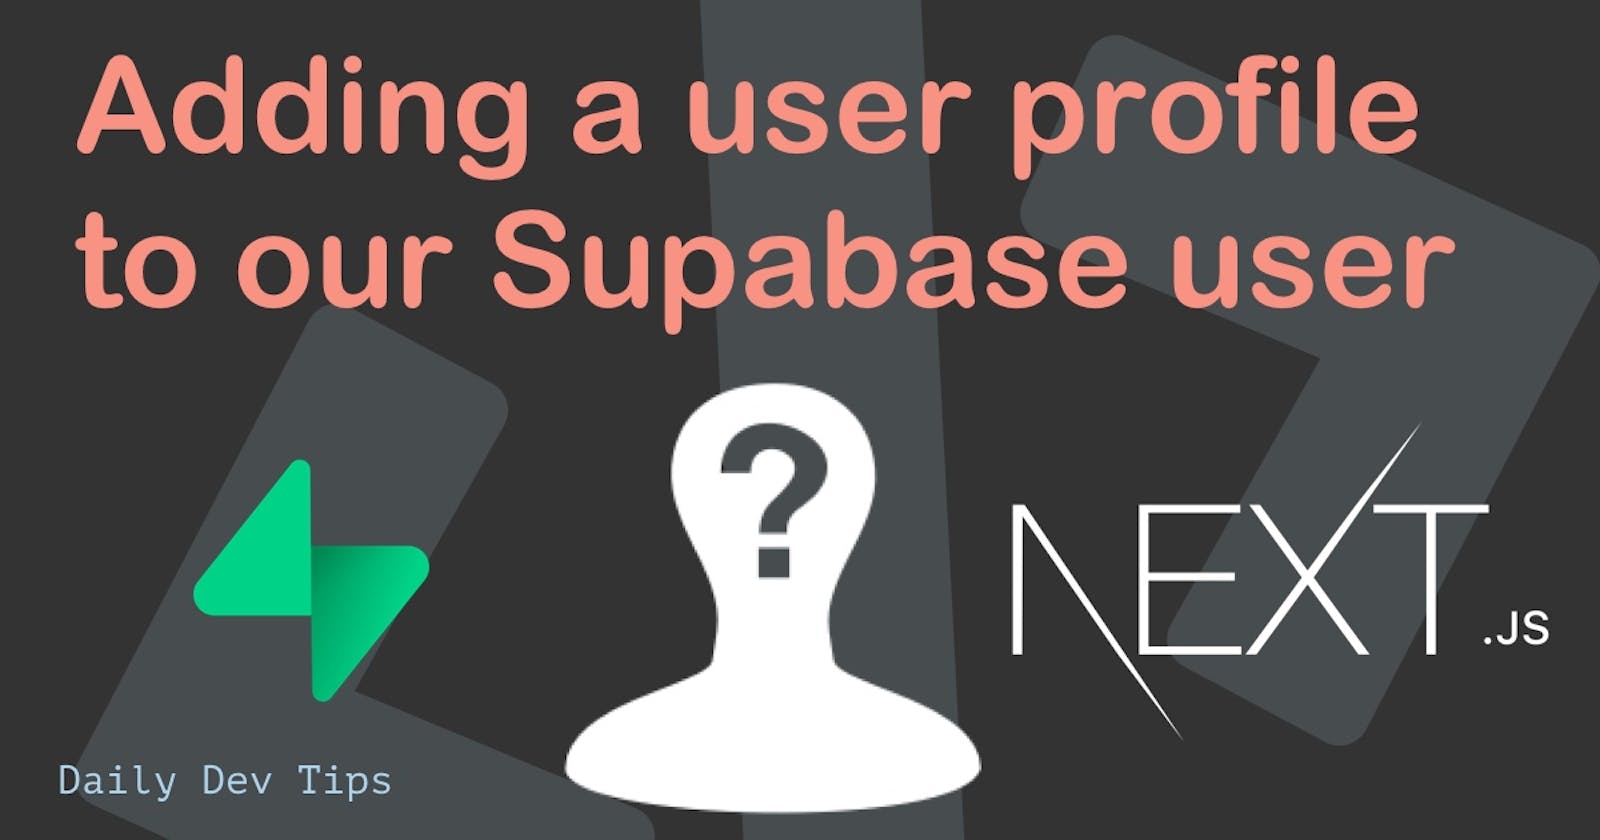 Adding a user profile to our Supabase user